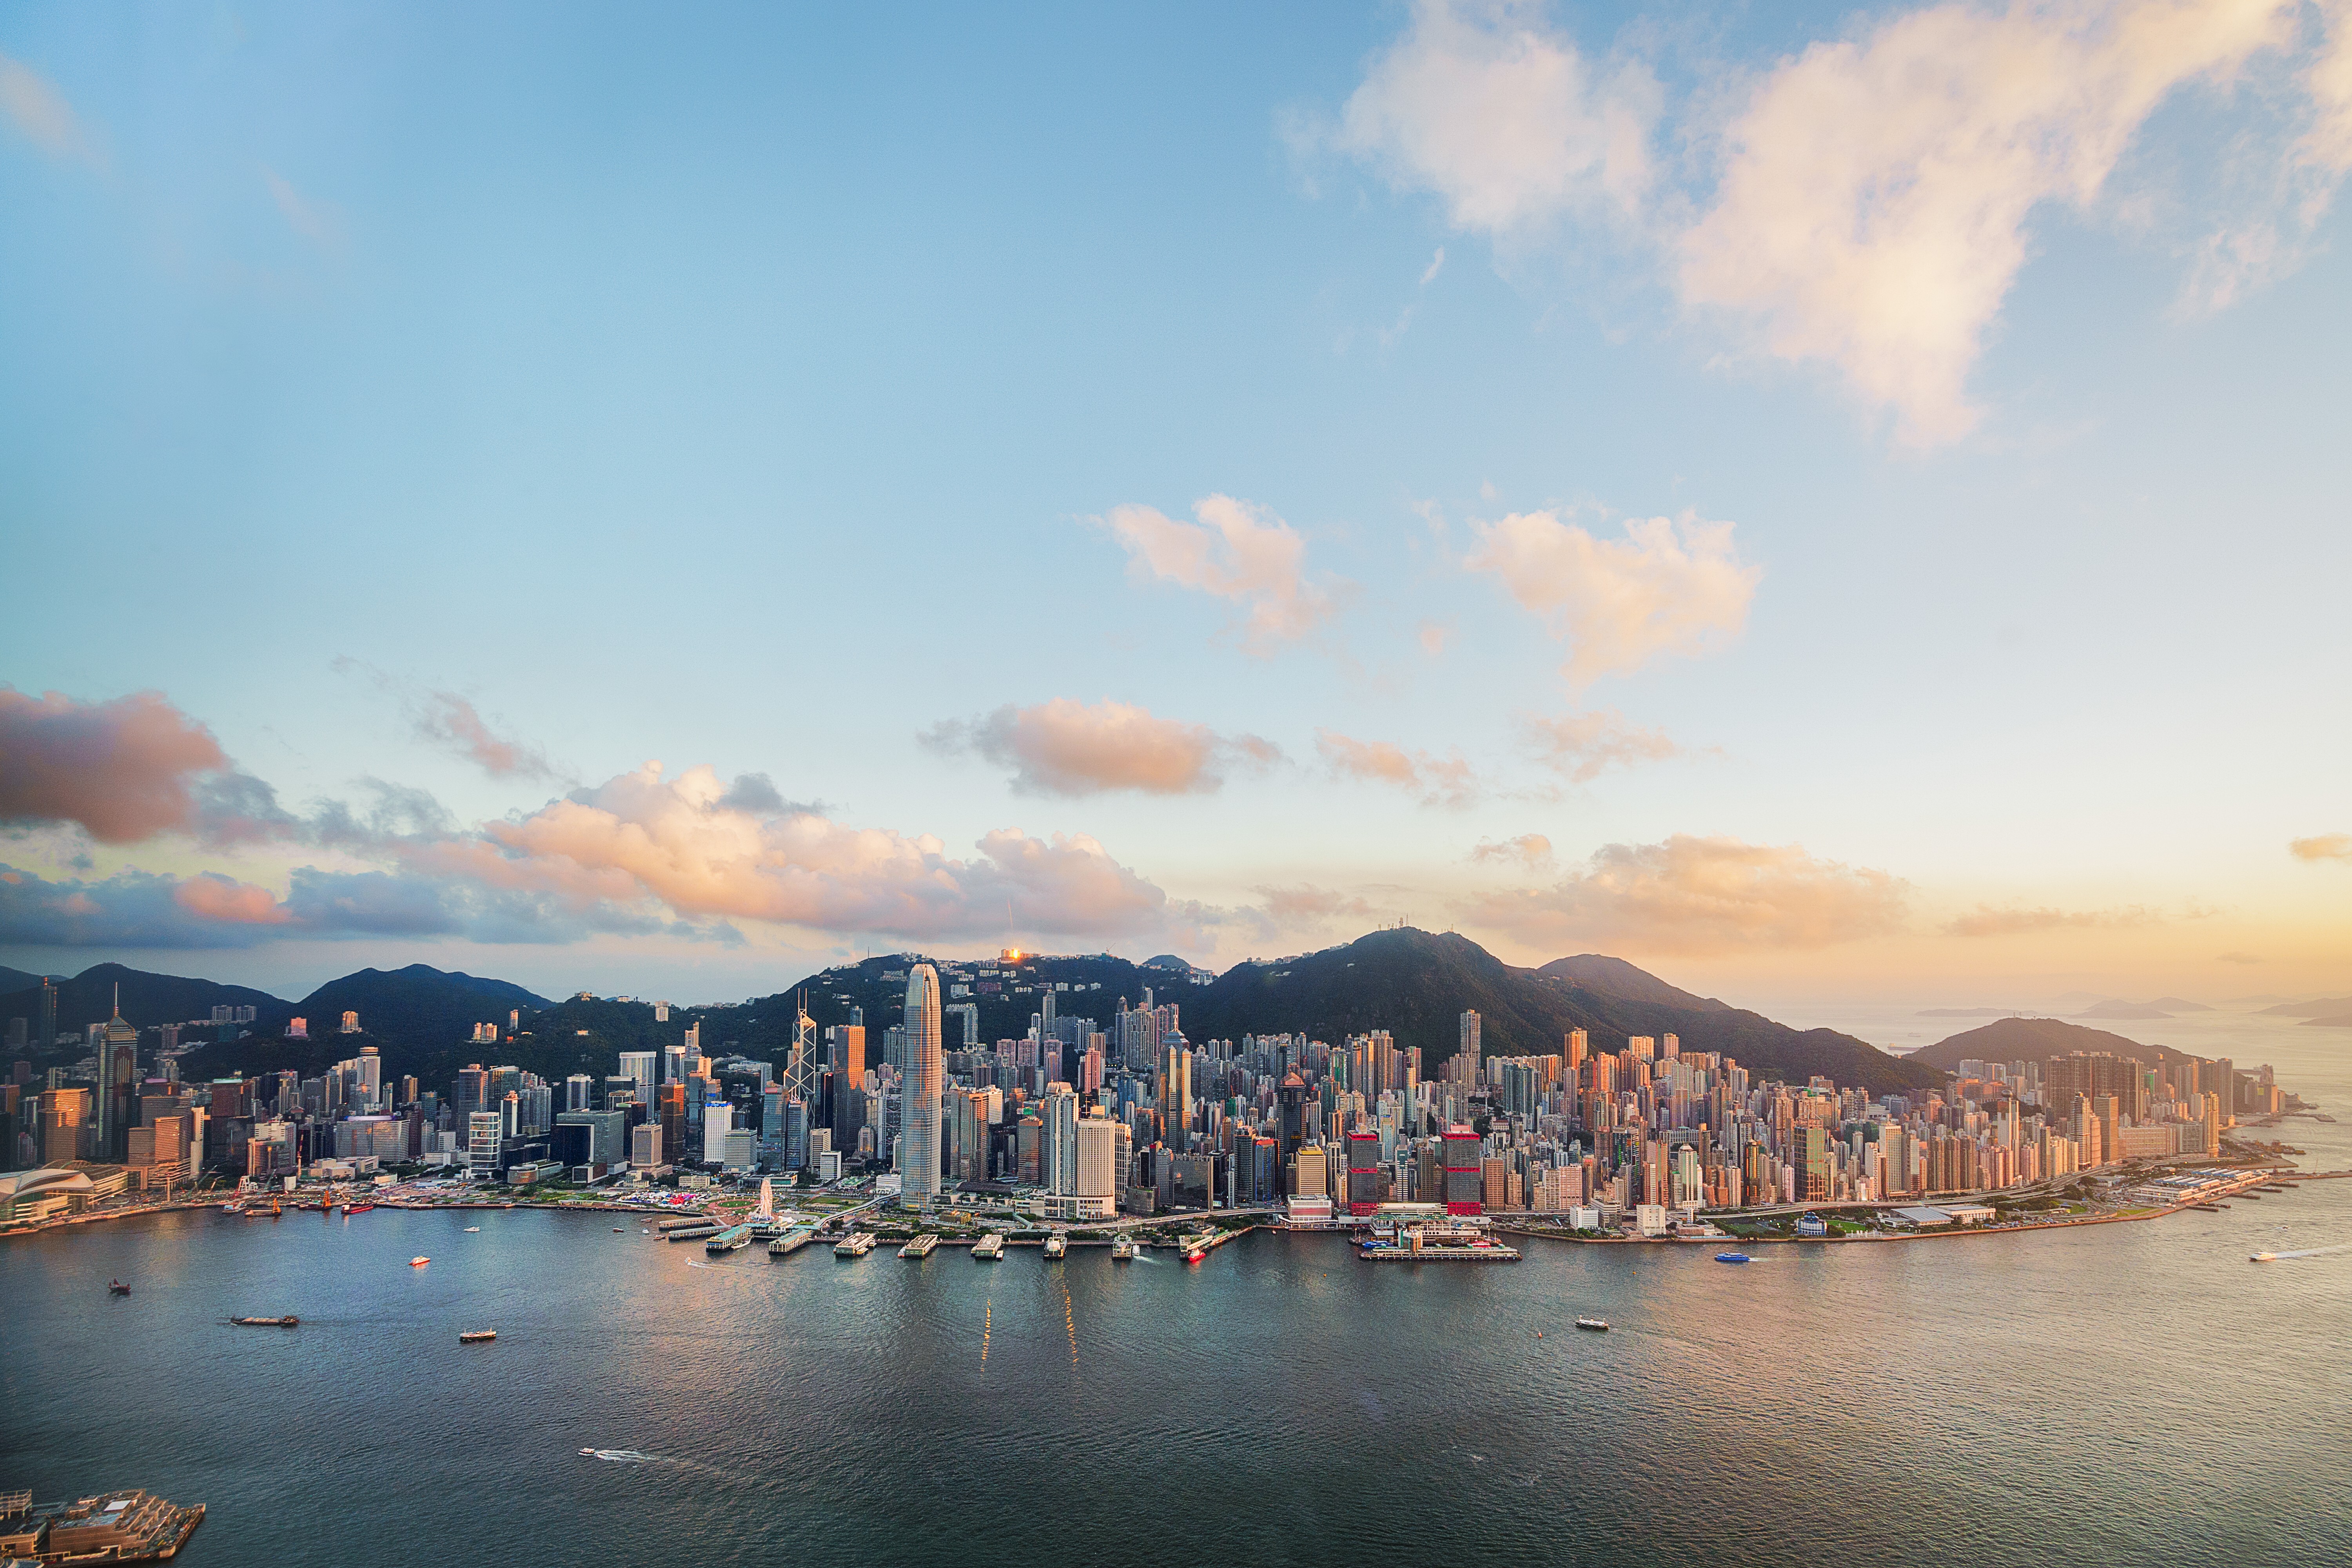 The rise of global Covid-19 vaccination rates will pave the way for Hong Kong’s property prices to rise further. Photo: Getty Images/iStockphoto